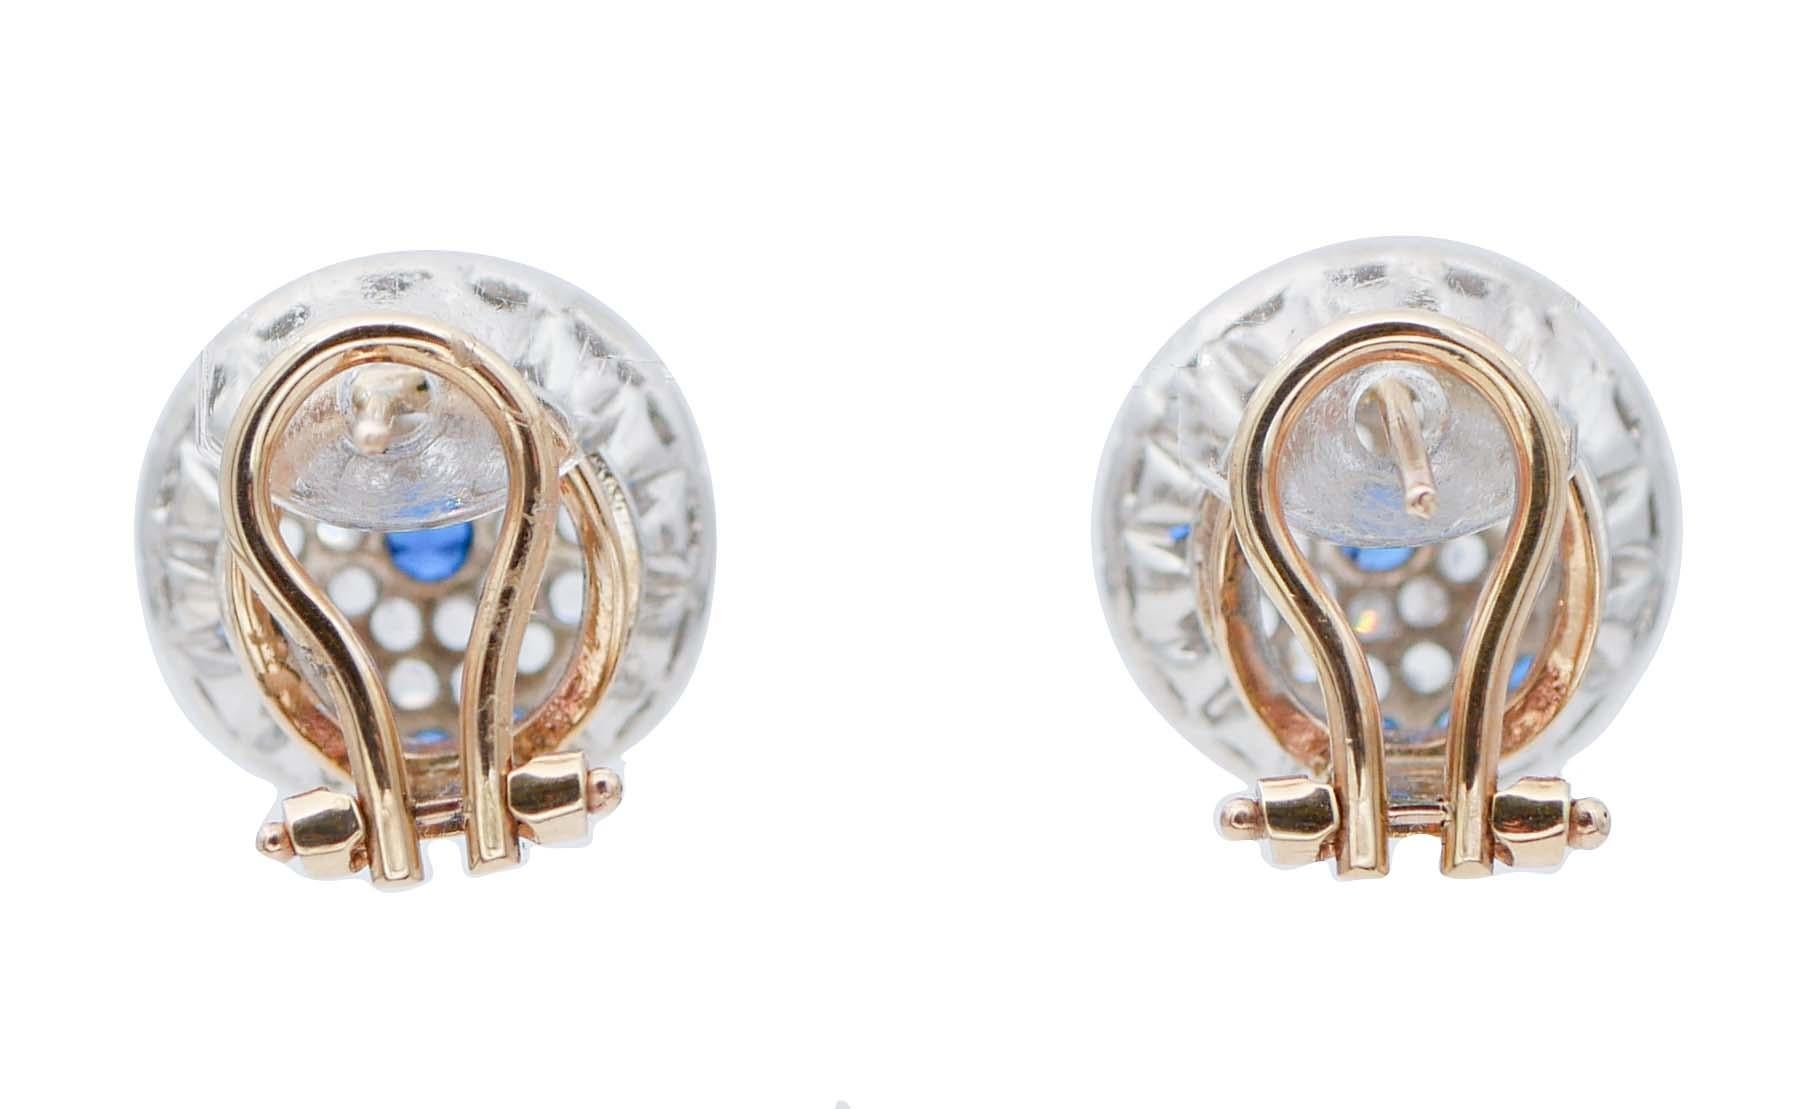 Retro White and Blue Stones, Rose Gold and Silver Retrò Earrings